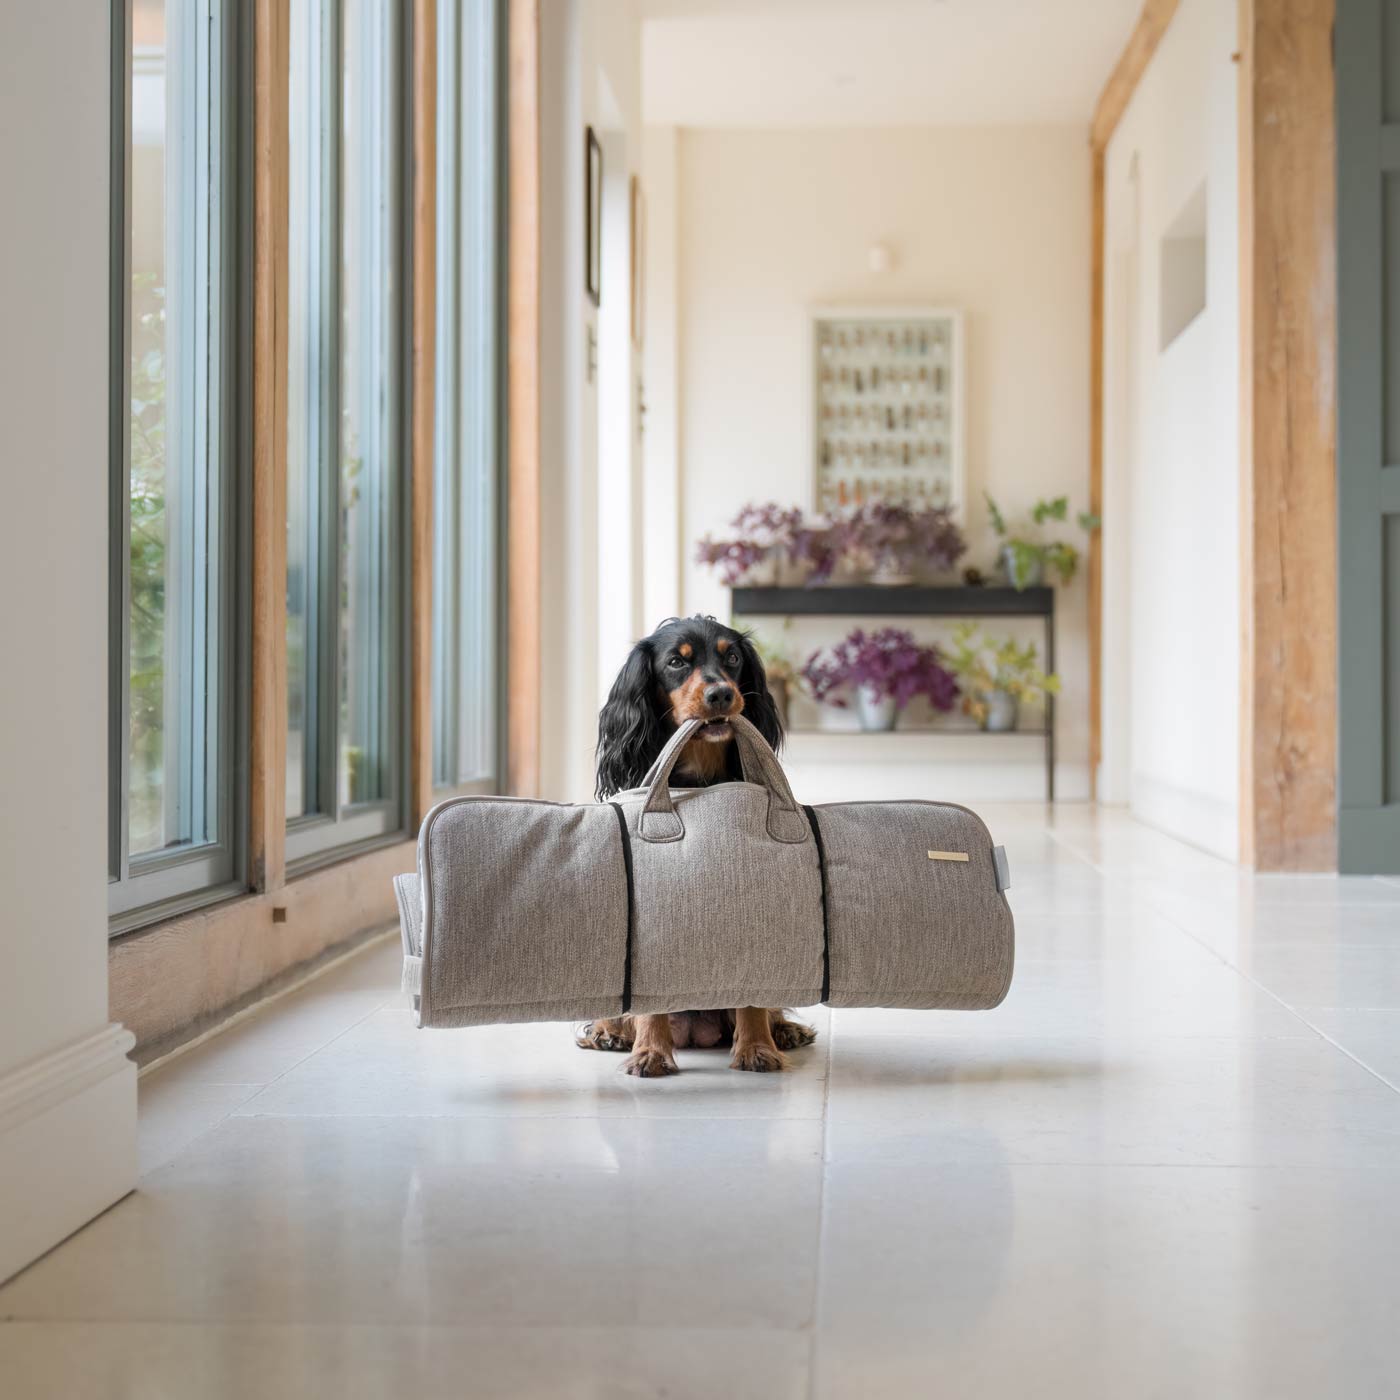 Embark on the perfect pet travel with our luxury Roll & Go Travel Mat! Featuring handles for easy carrying, the perfect addition that can be used on the Go in the car, at home or as a travel bed! Available now at Lords & Labradors